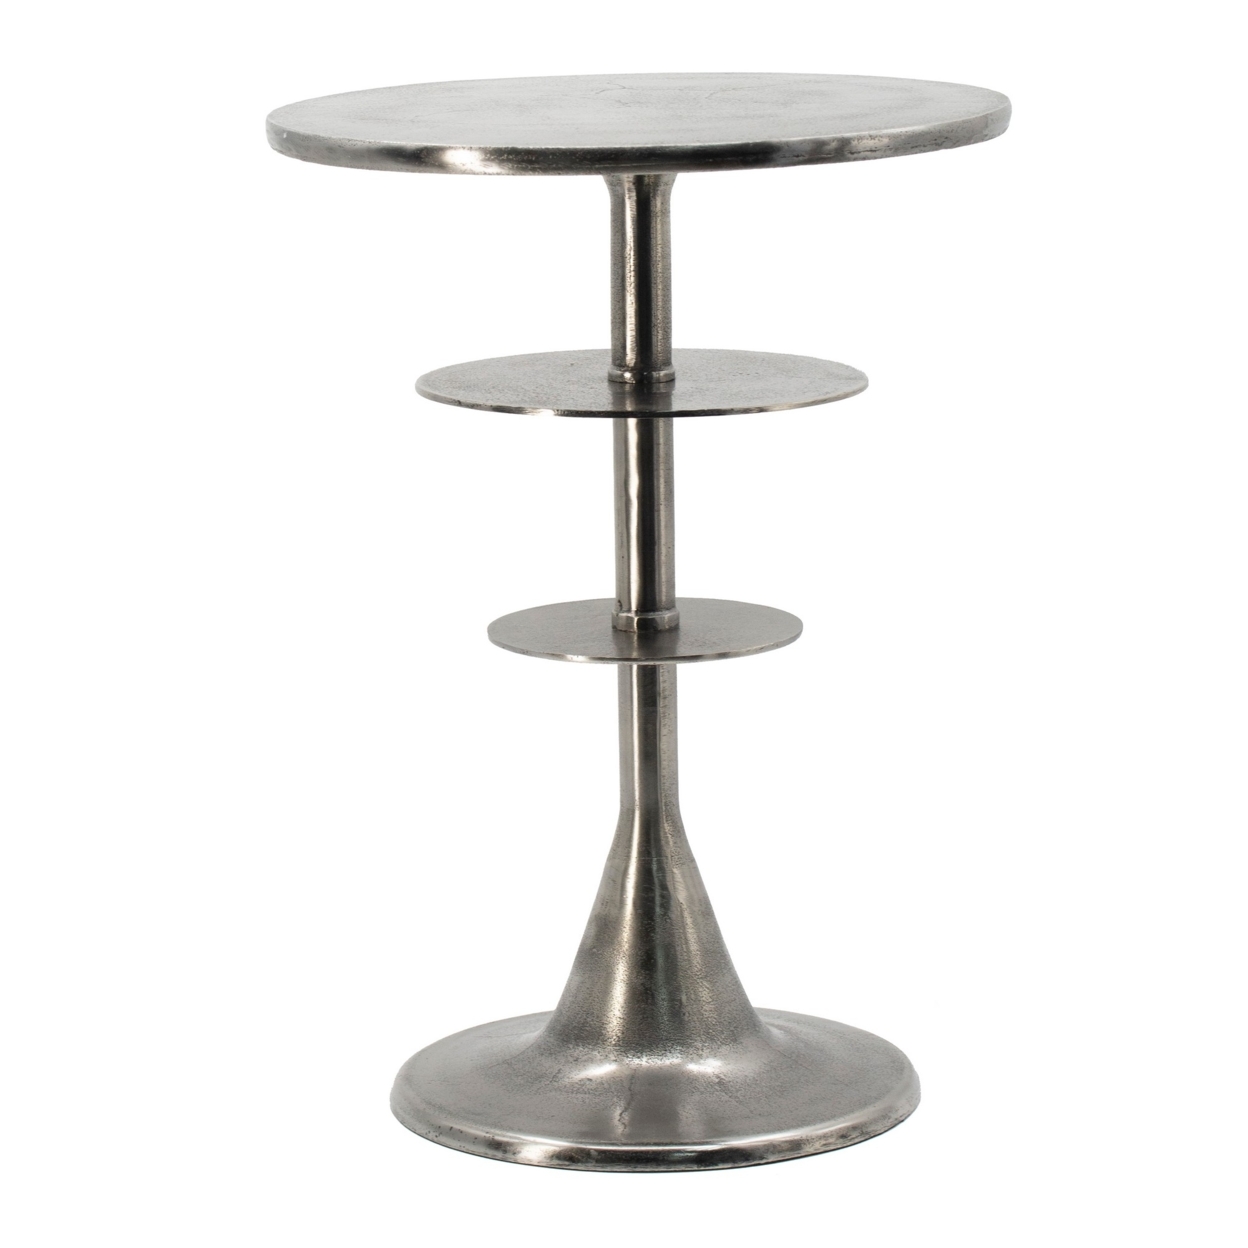 Aja 22 Inch Aluminum Accent Table, Rounded Top, Teardrop Base, Silver- Saltoro Sherpi